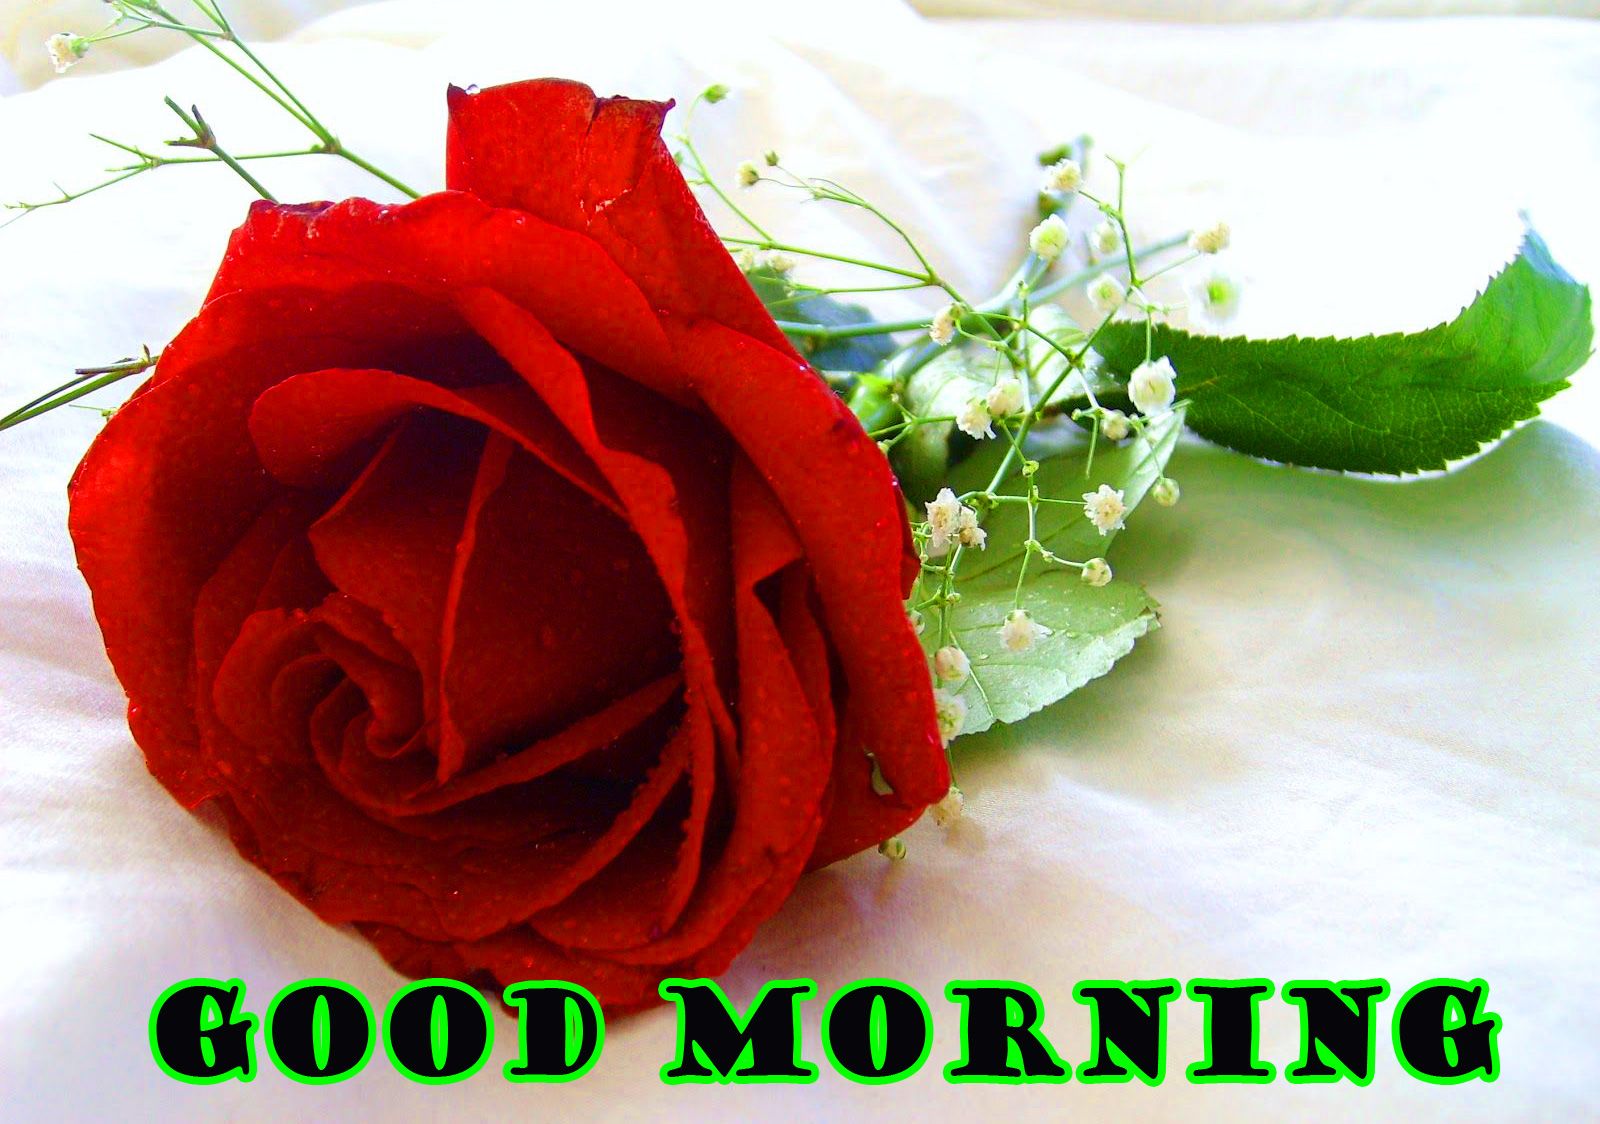 472 Good Morning Red Rose Images Wallpaper Pics For - Rose गुड मॉर्निंग इमेज , HD Wallpaper & Backgrounds